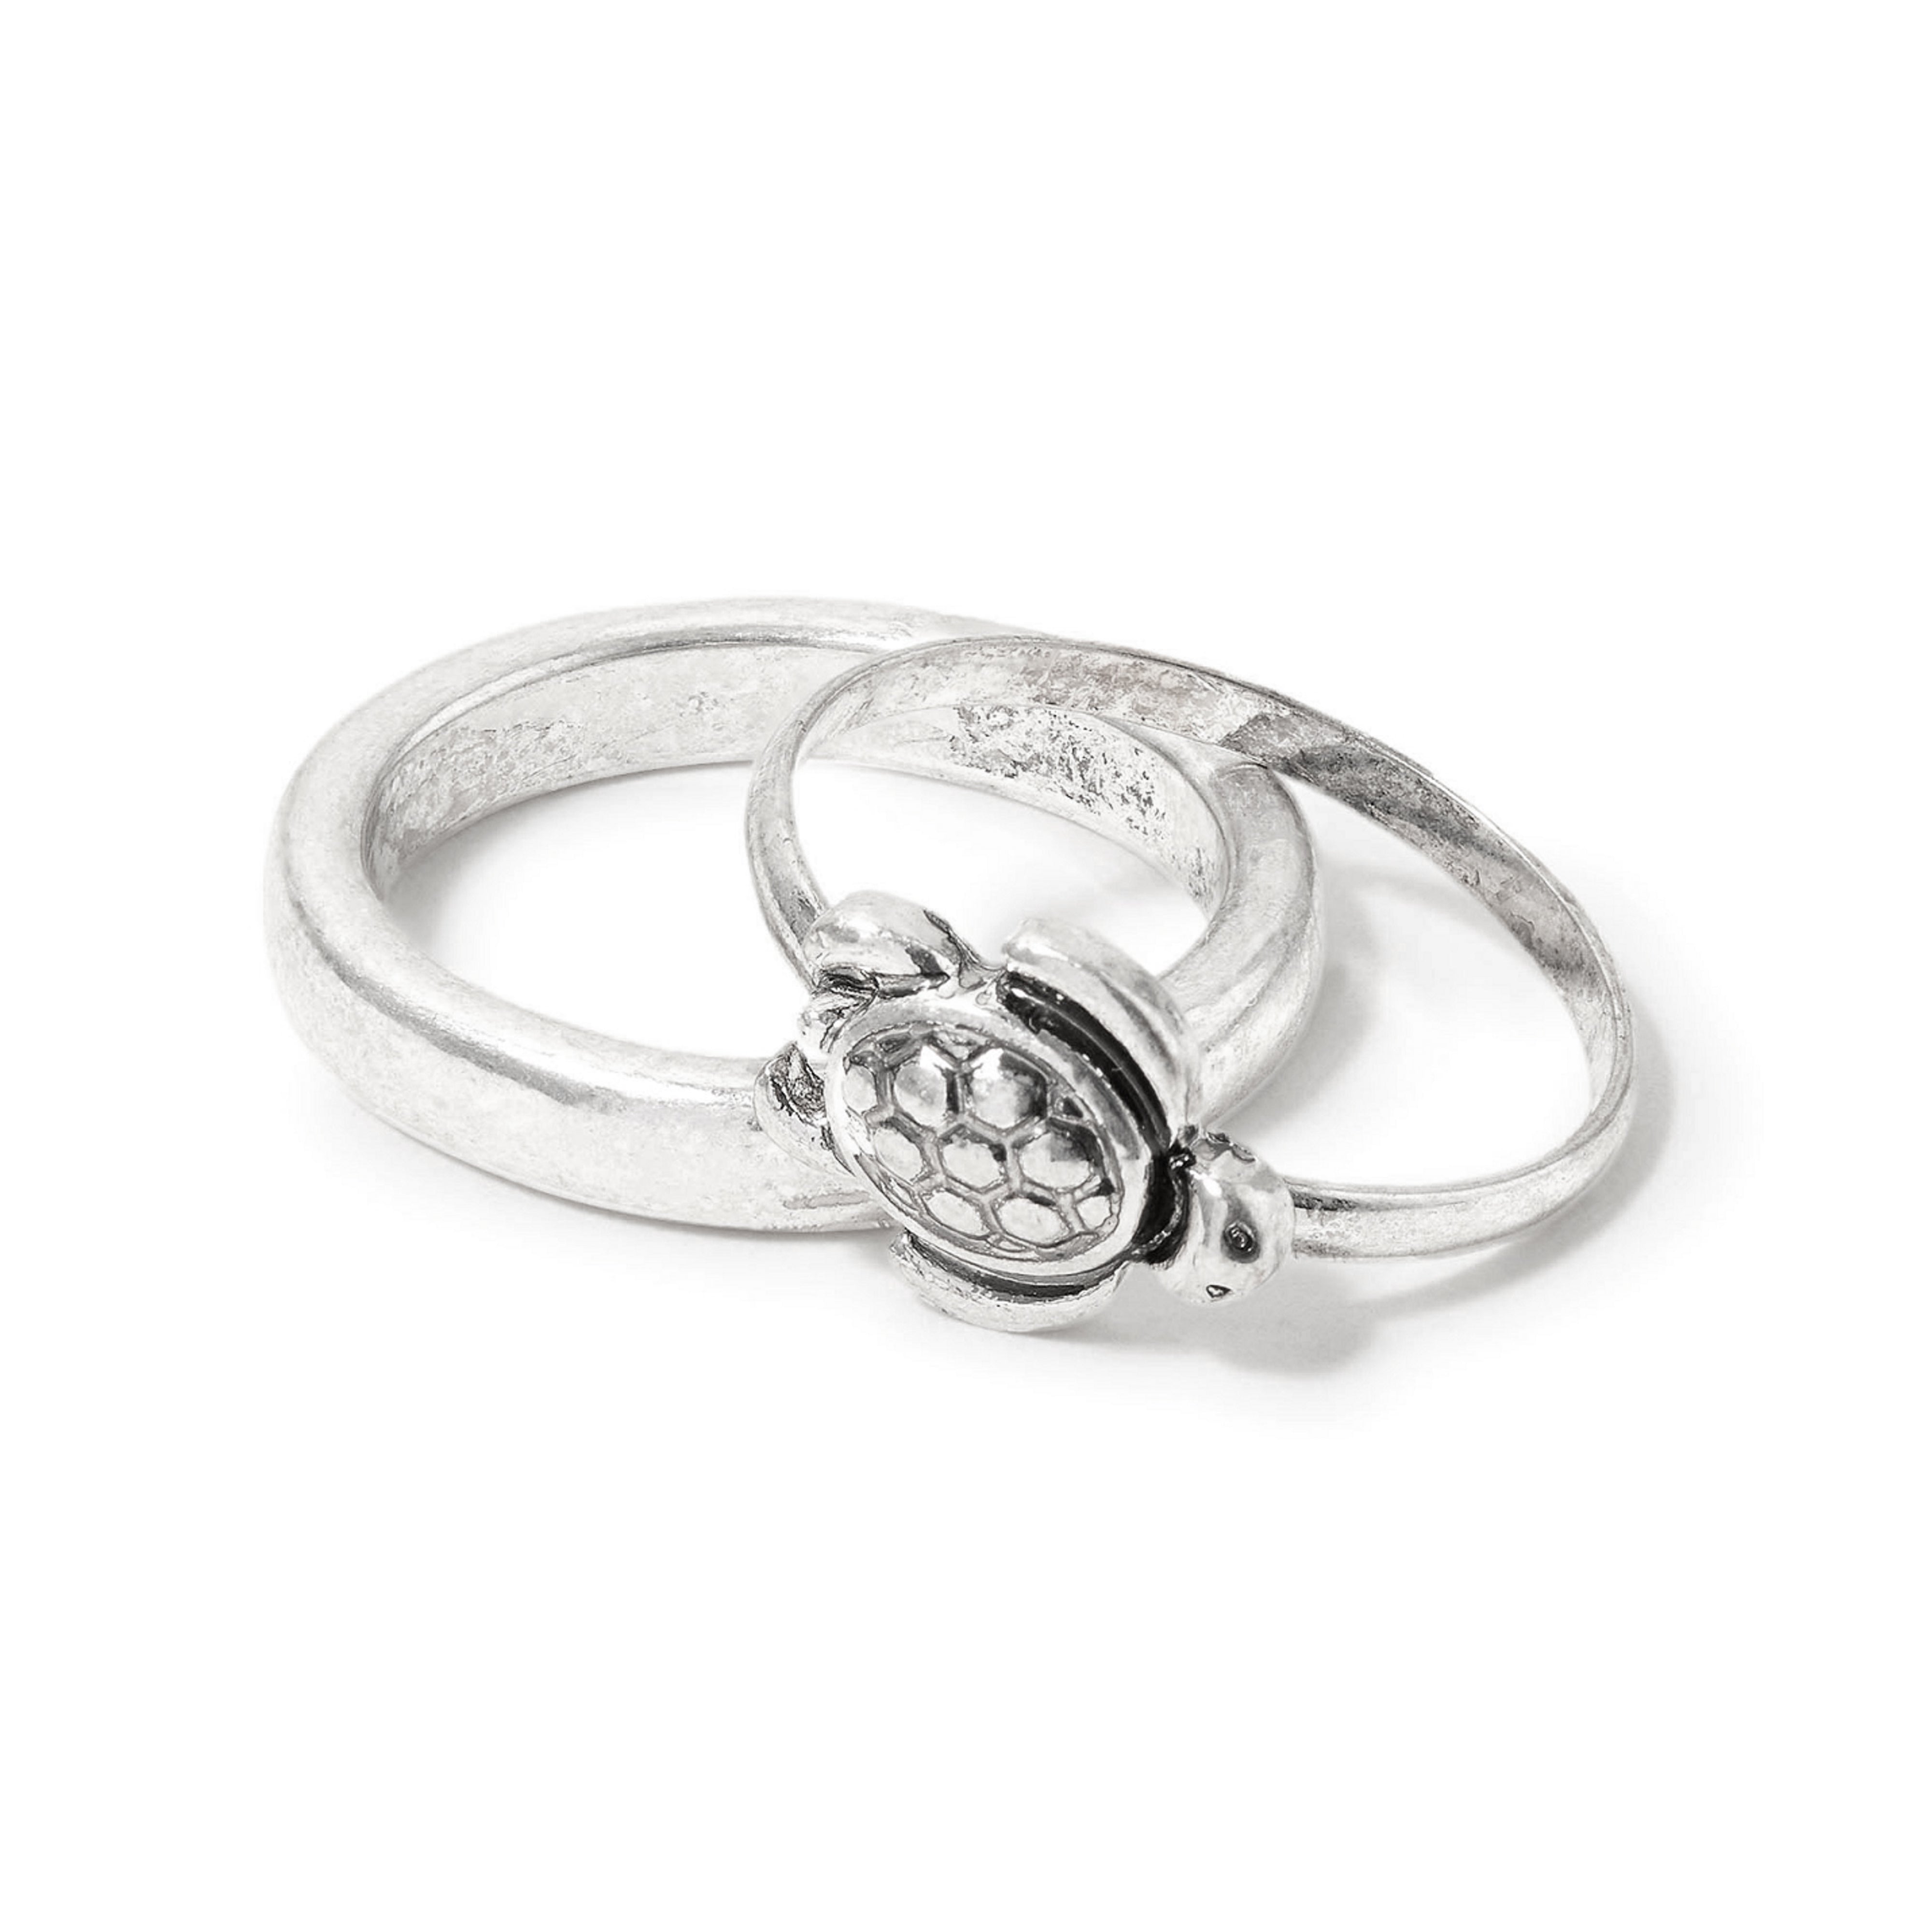 Accessorize London Women's set of 2 Silver Tilly Turtle Ring Pack